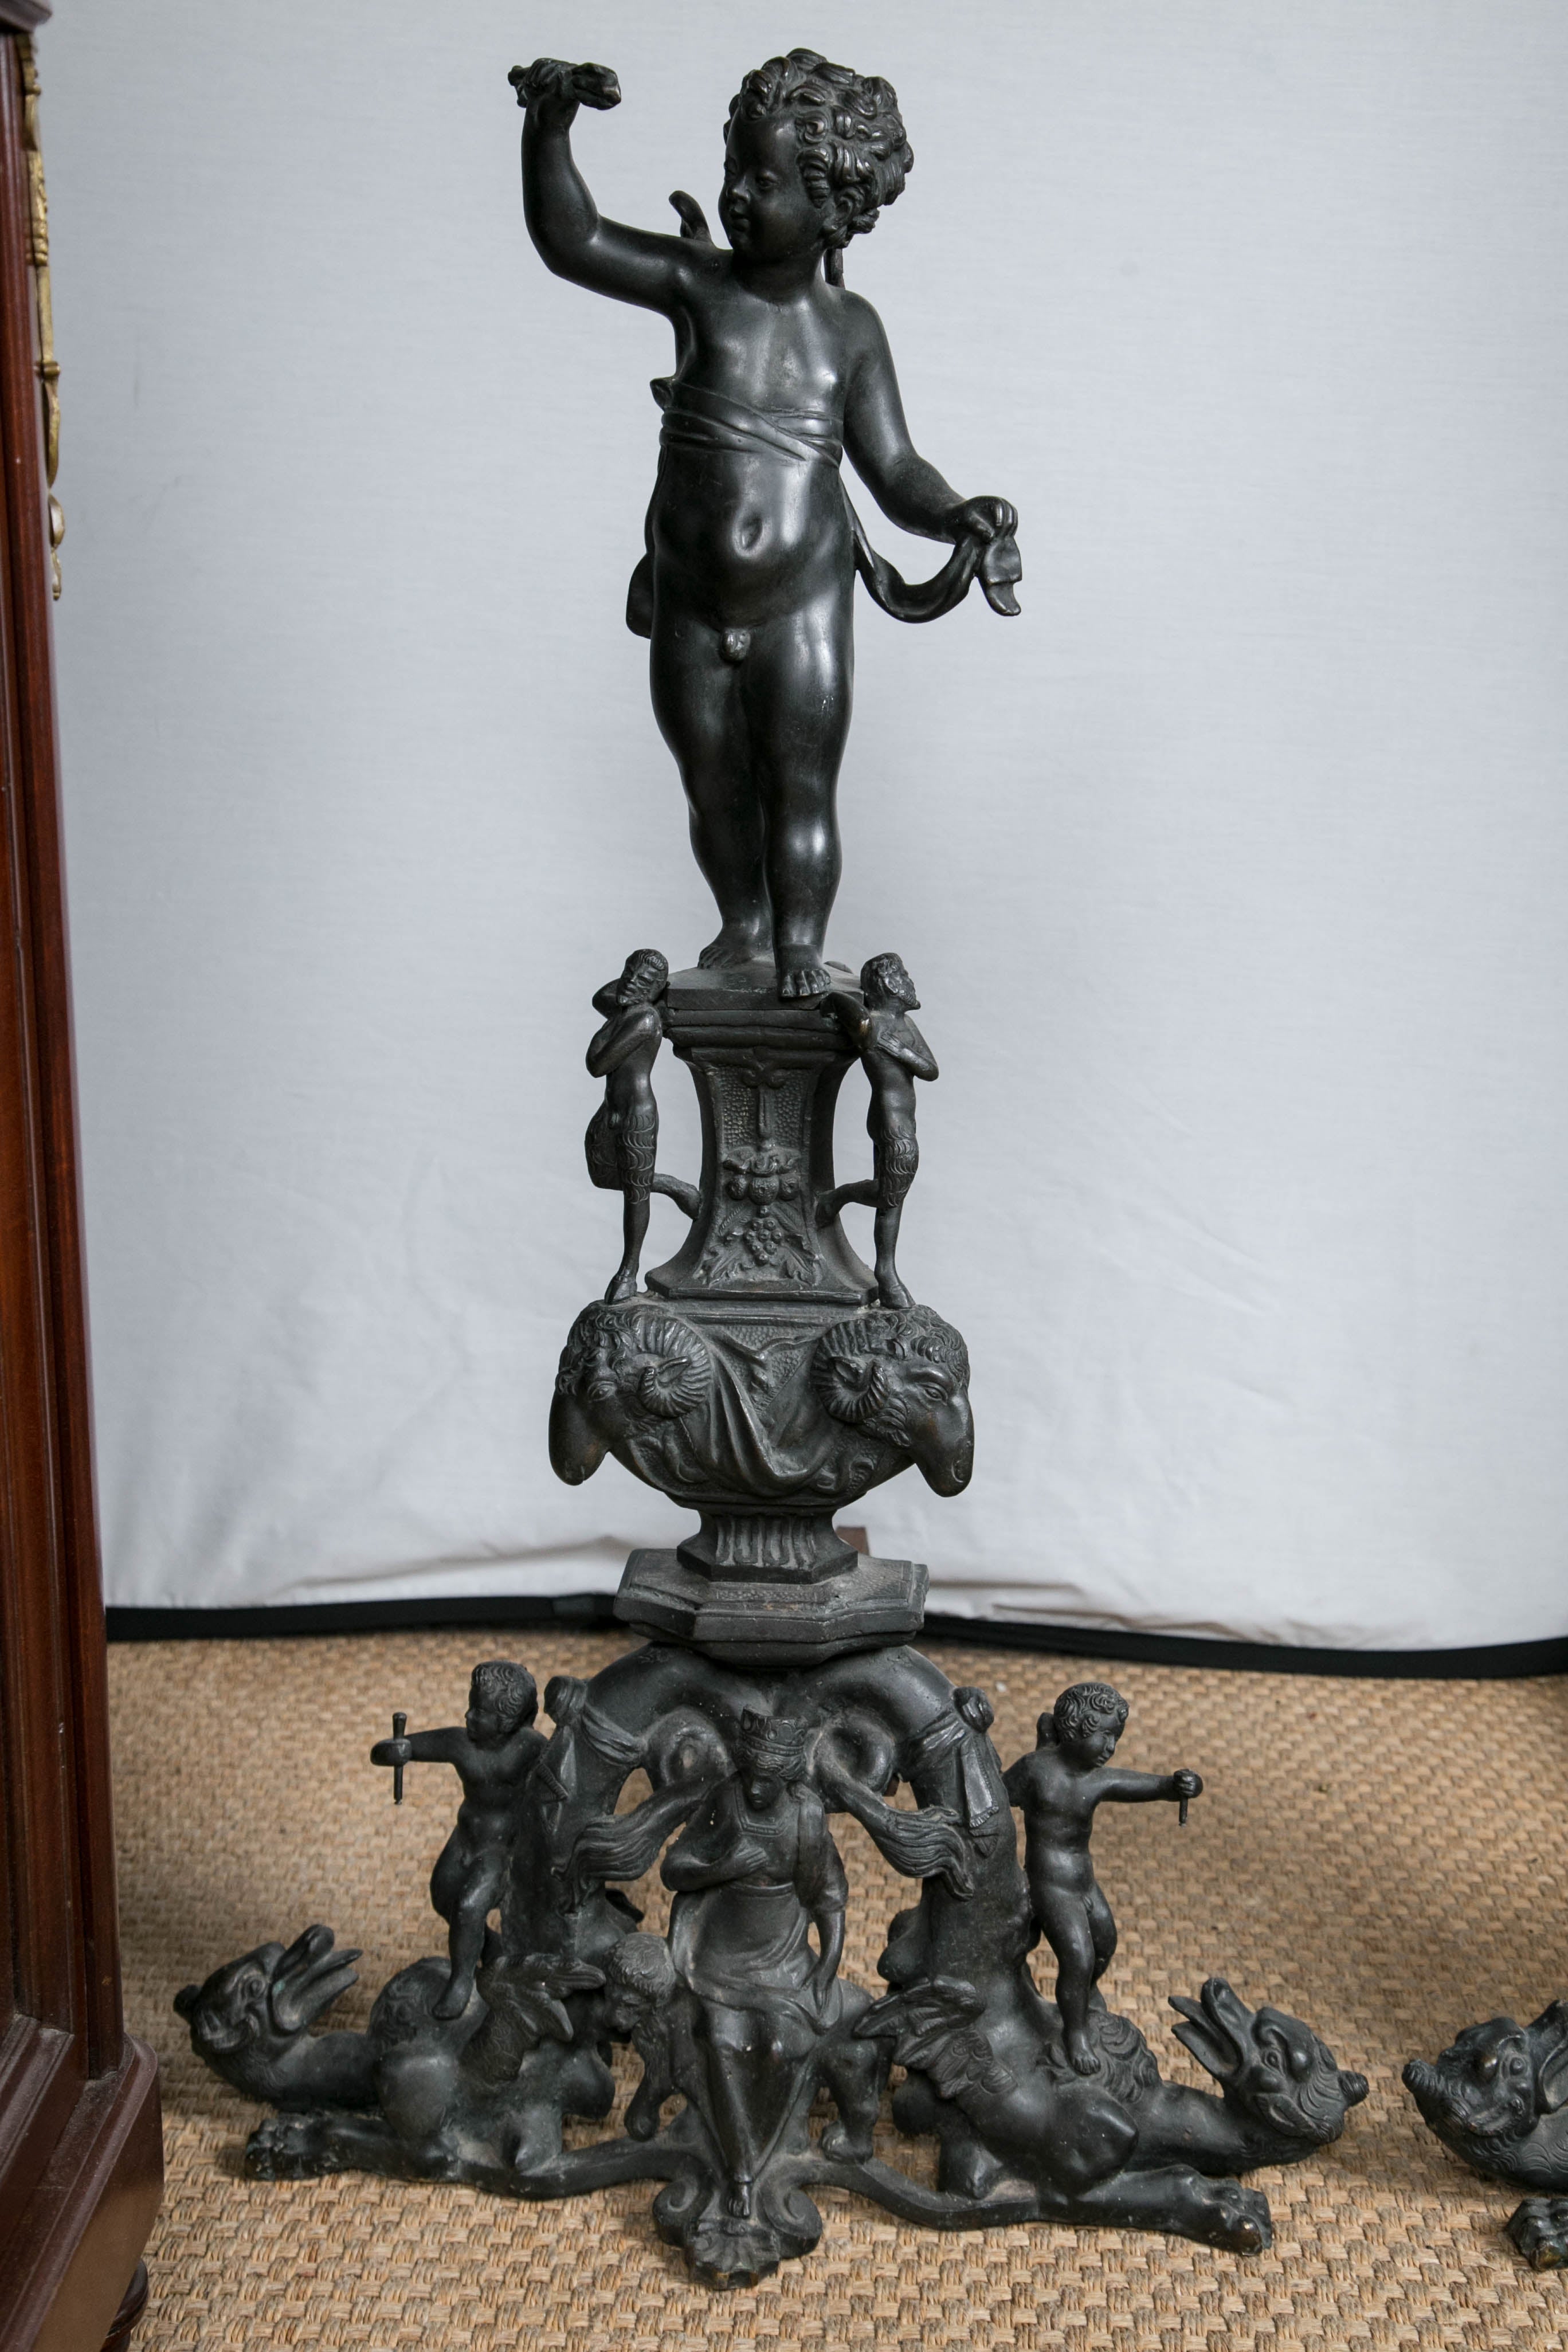 This pair is topped with winged putti above an urn decorated with satyrs standing a top ram's heads. Below are more winged putti with dragons.